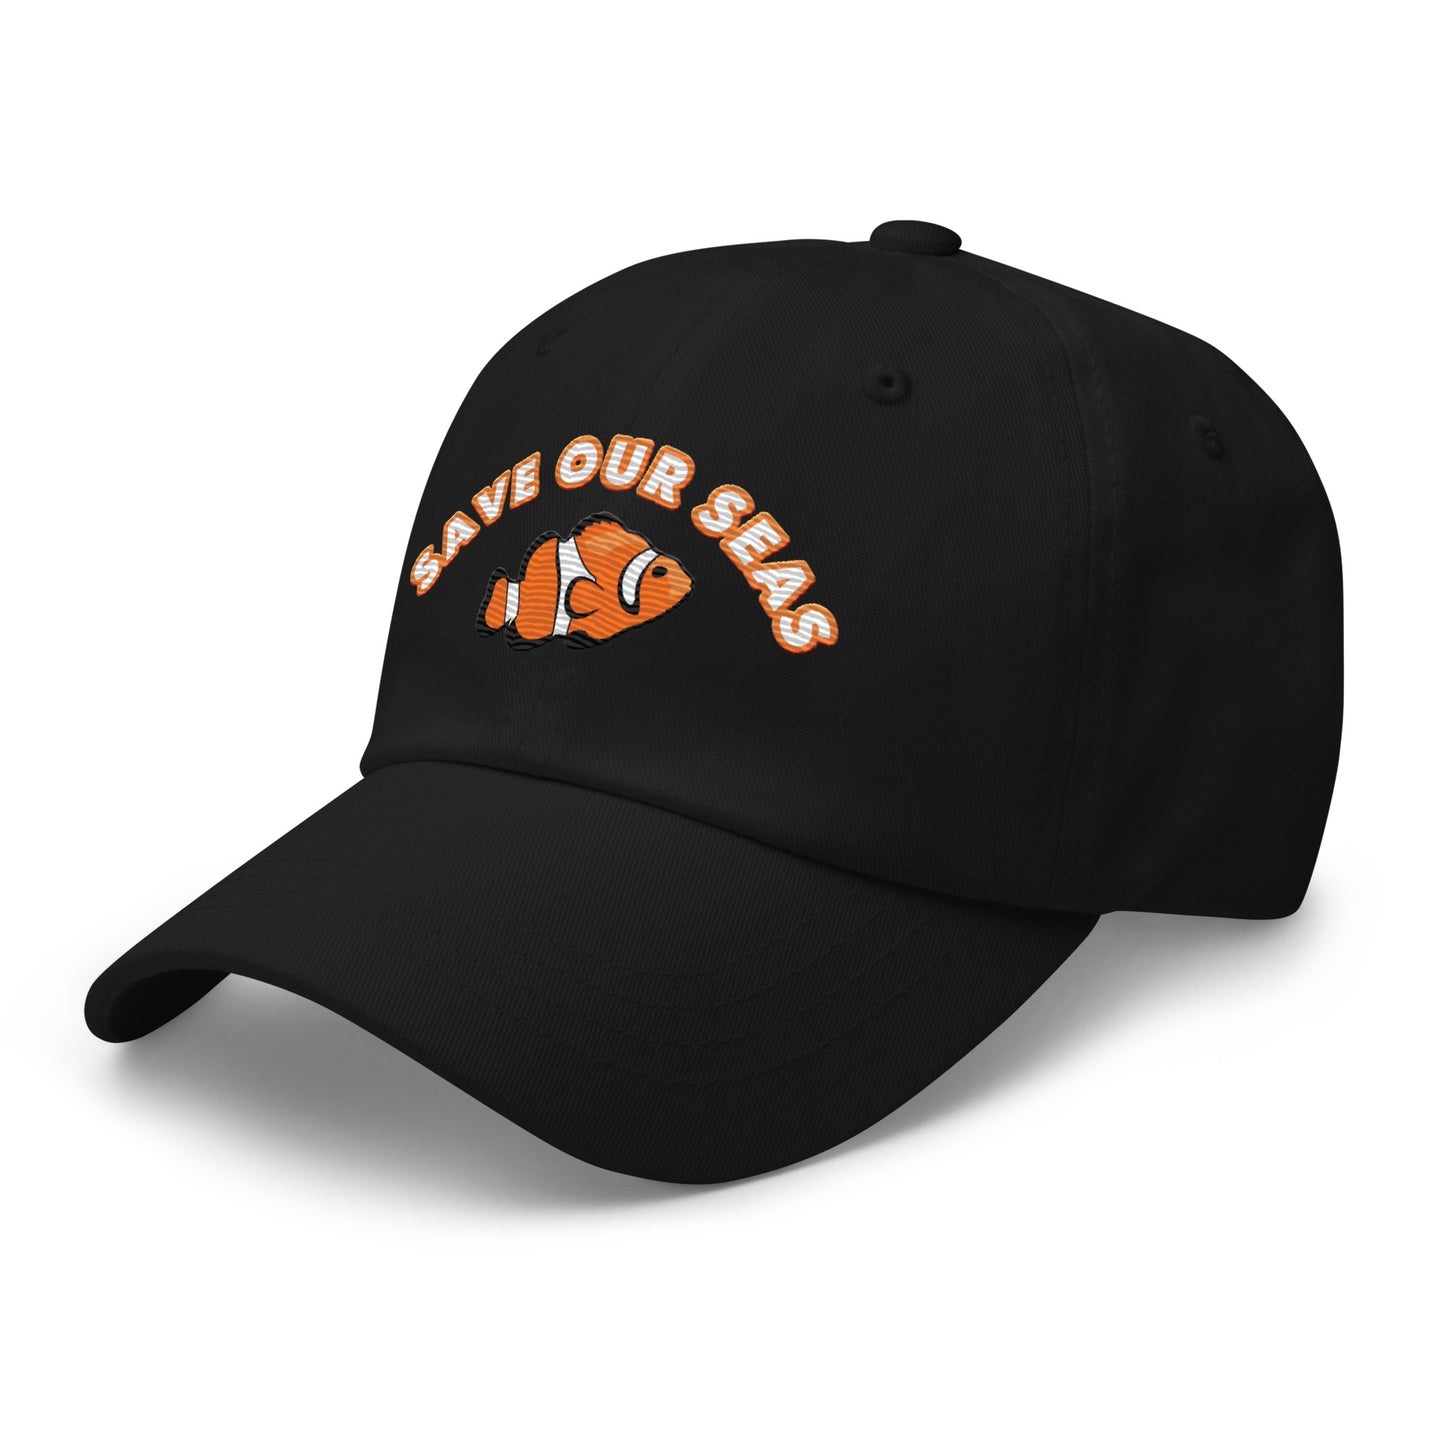 Save Our Seas Clownfish Dad hat: Pulls 4 pounds of ocean plastic!